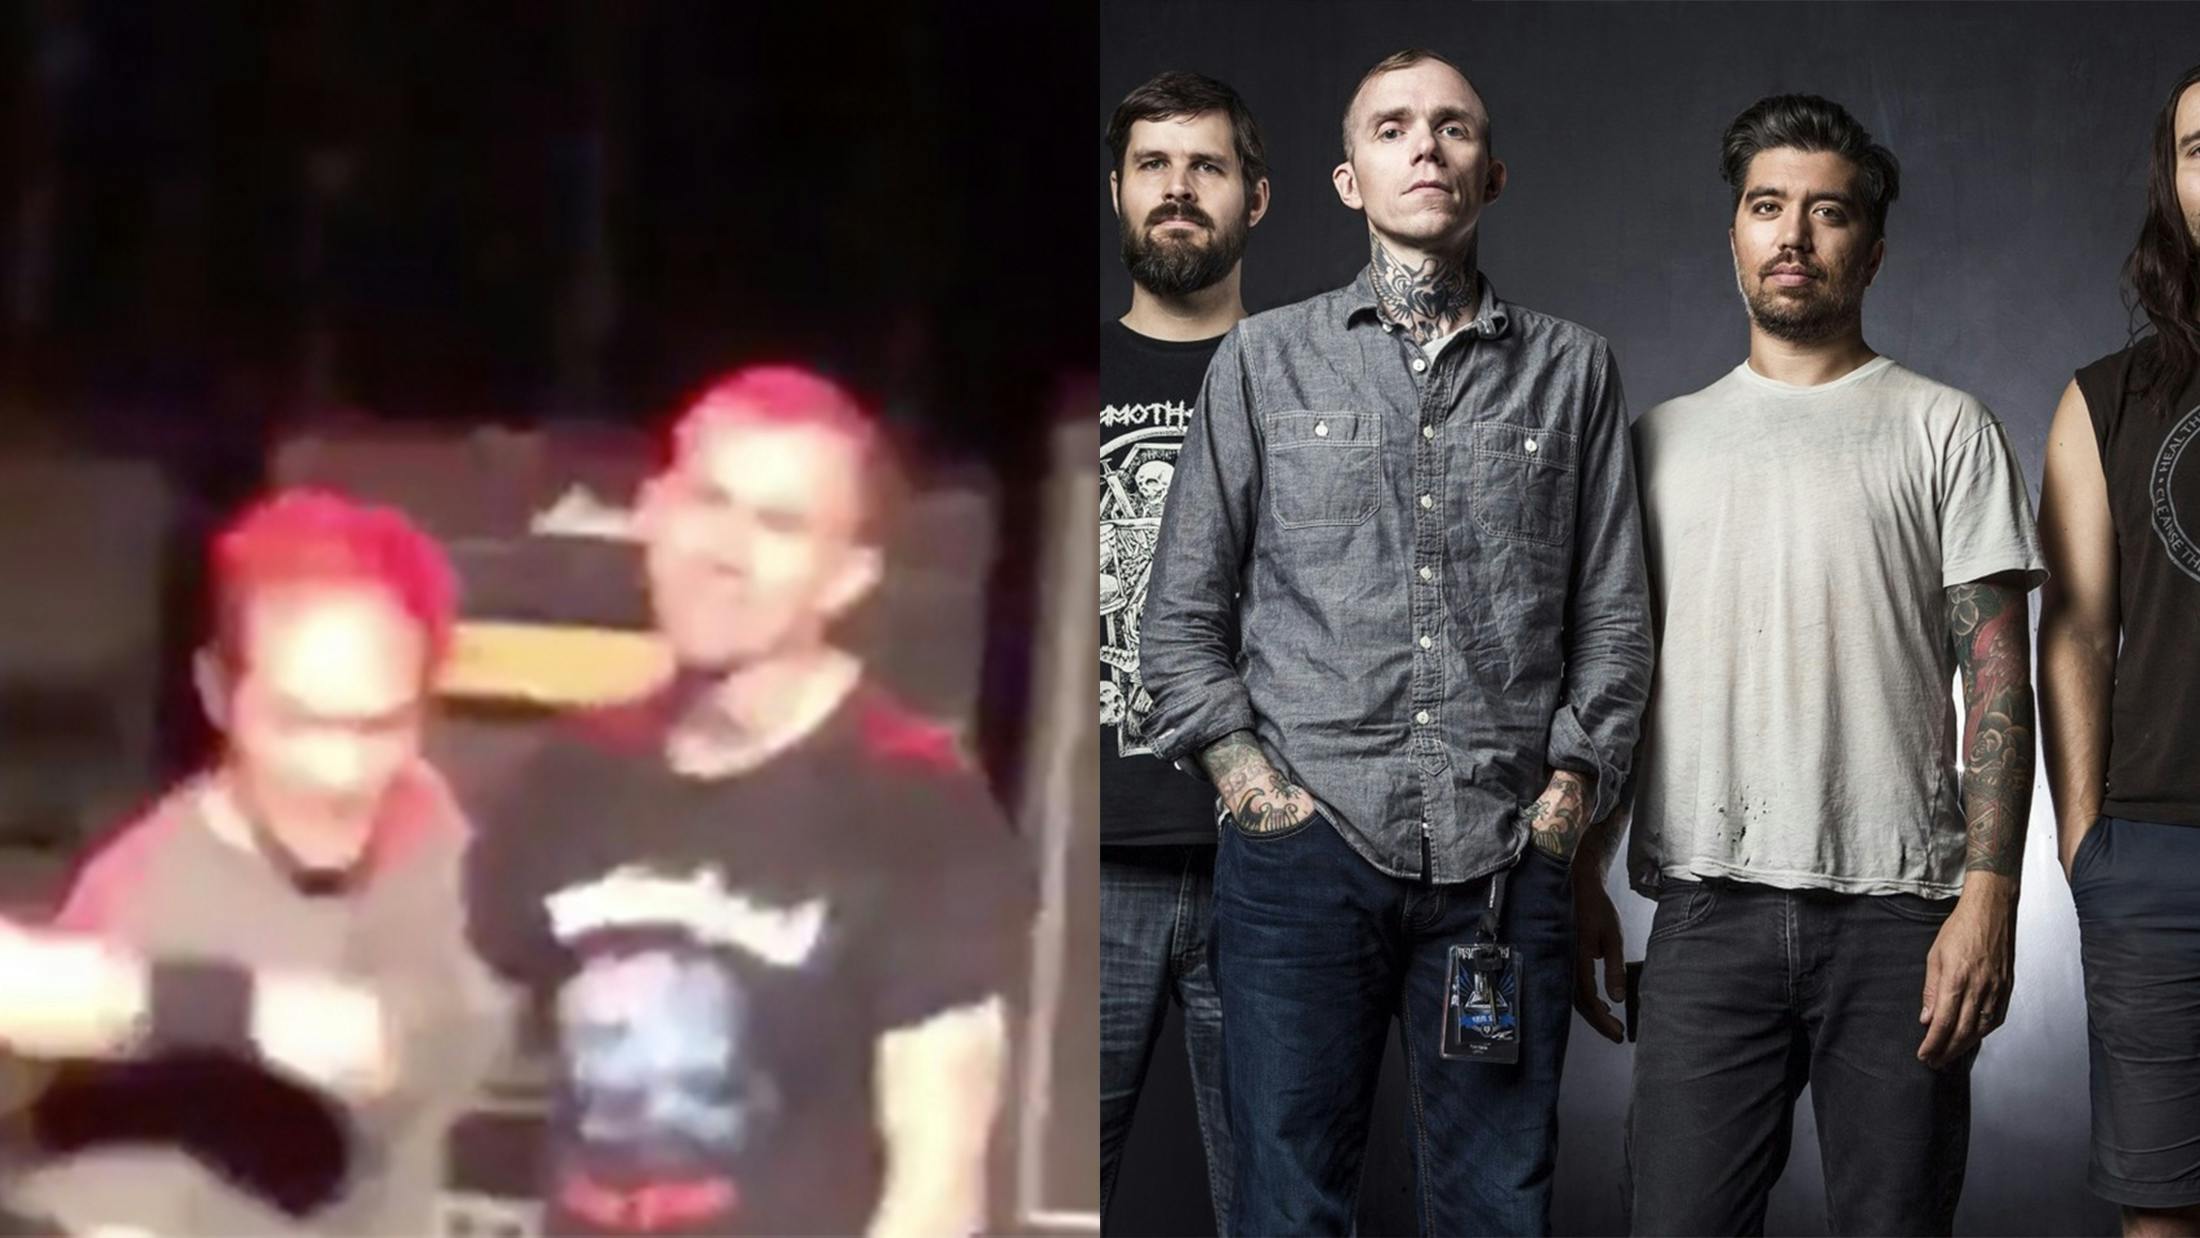 Guy Gets Selfie With Converge Singer Mid-Show, Clearly Does Not 'Get' Converge